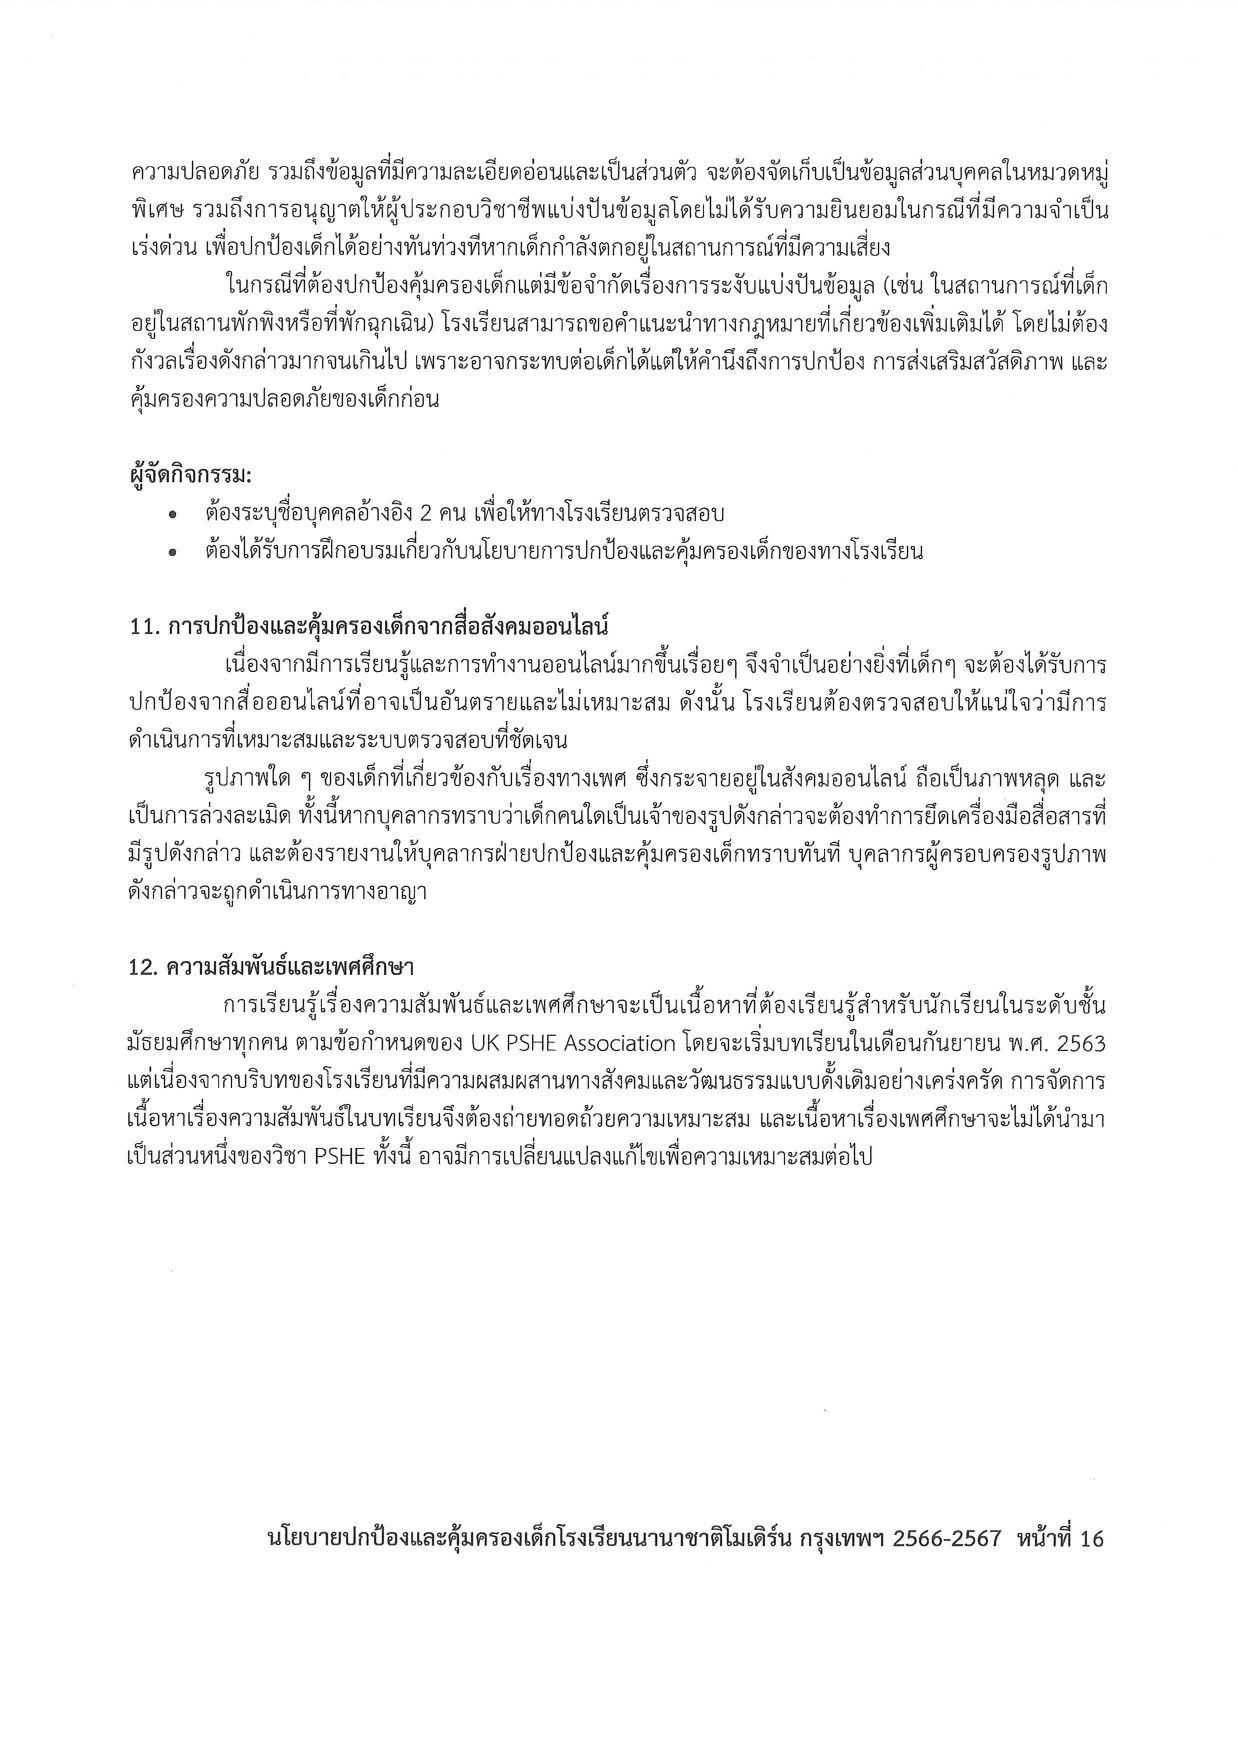 Child Protection Policy 2023 2024 Thai page 0016